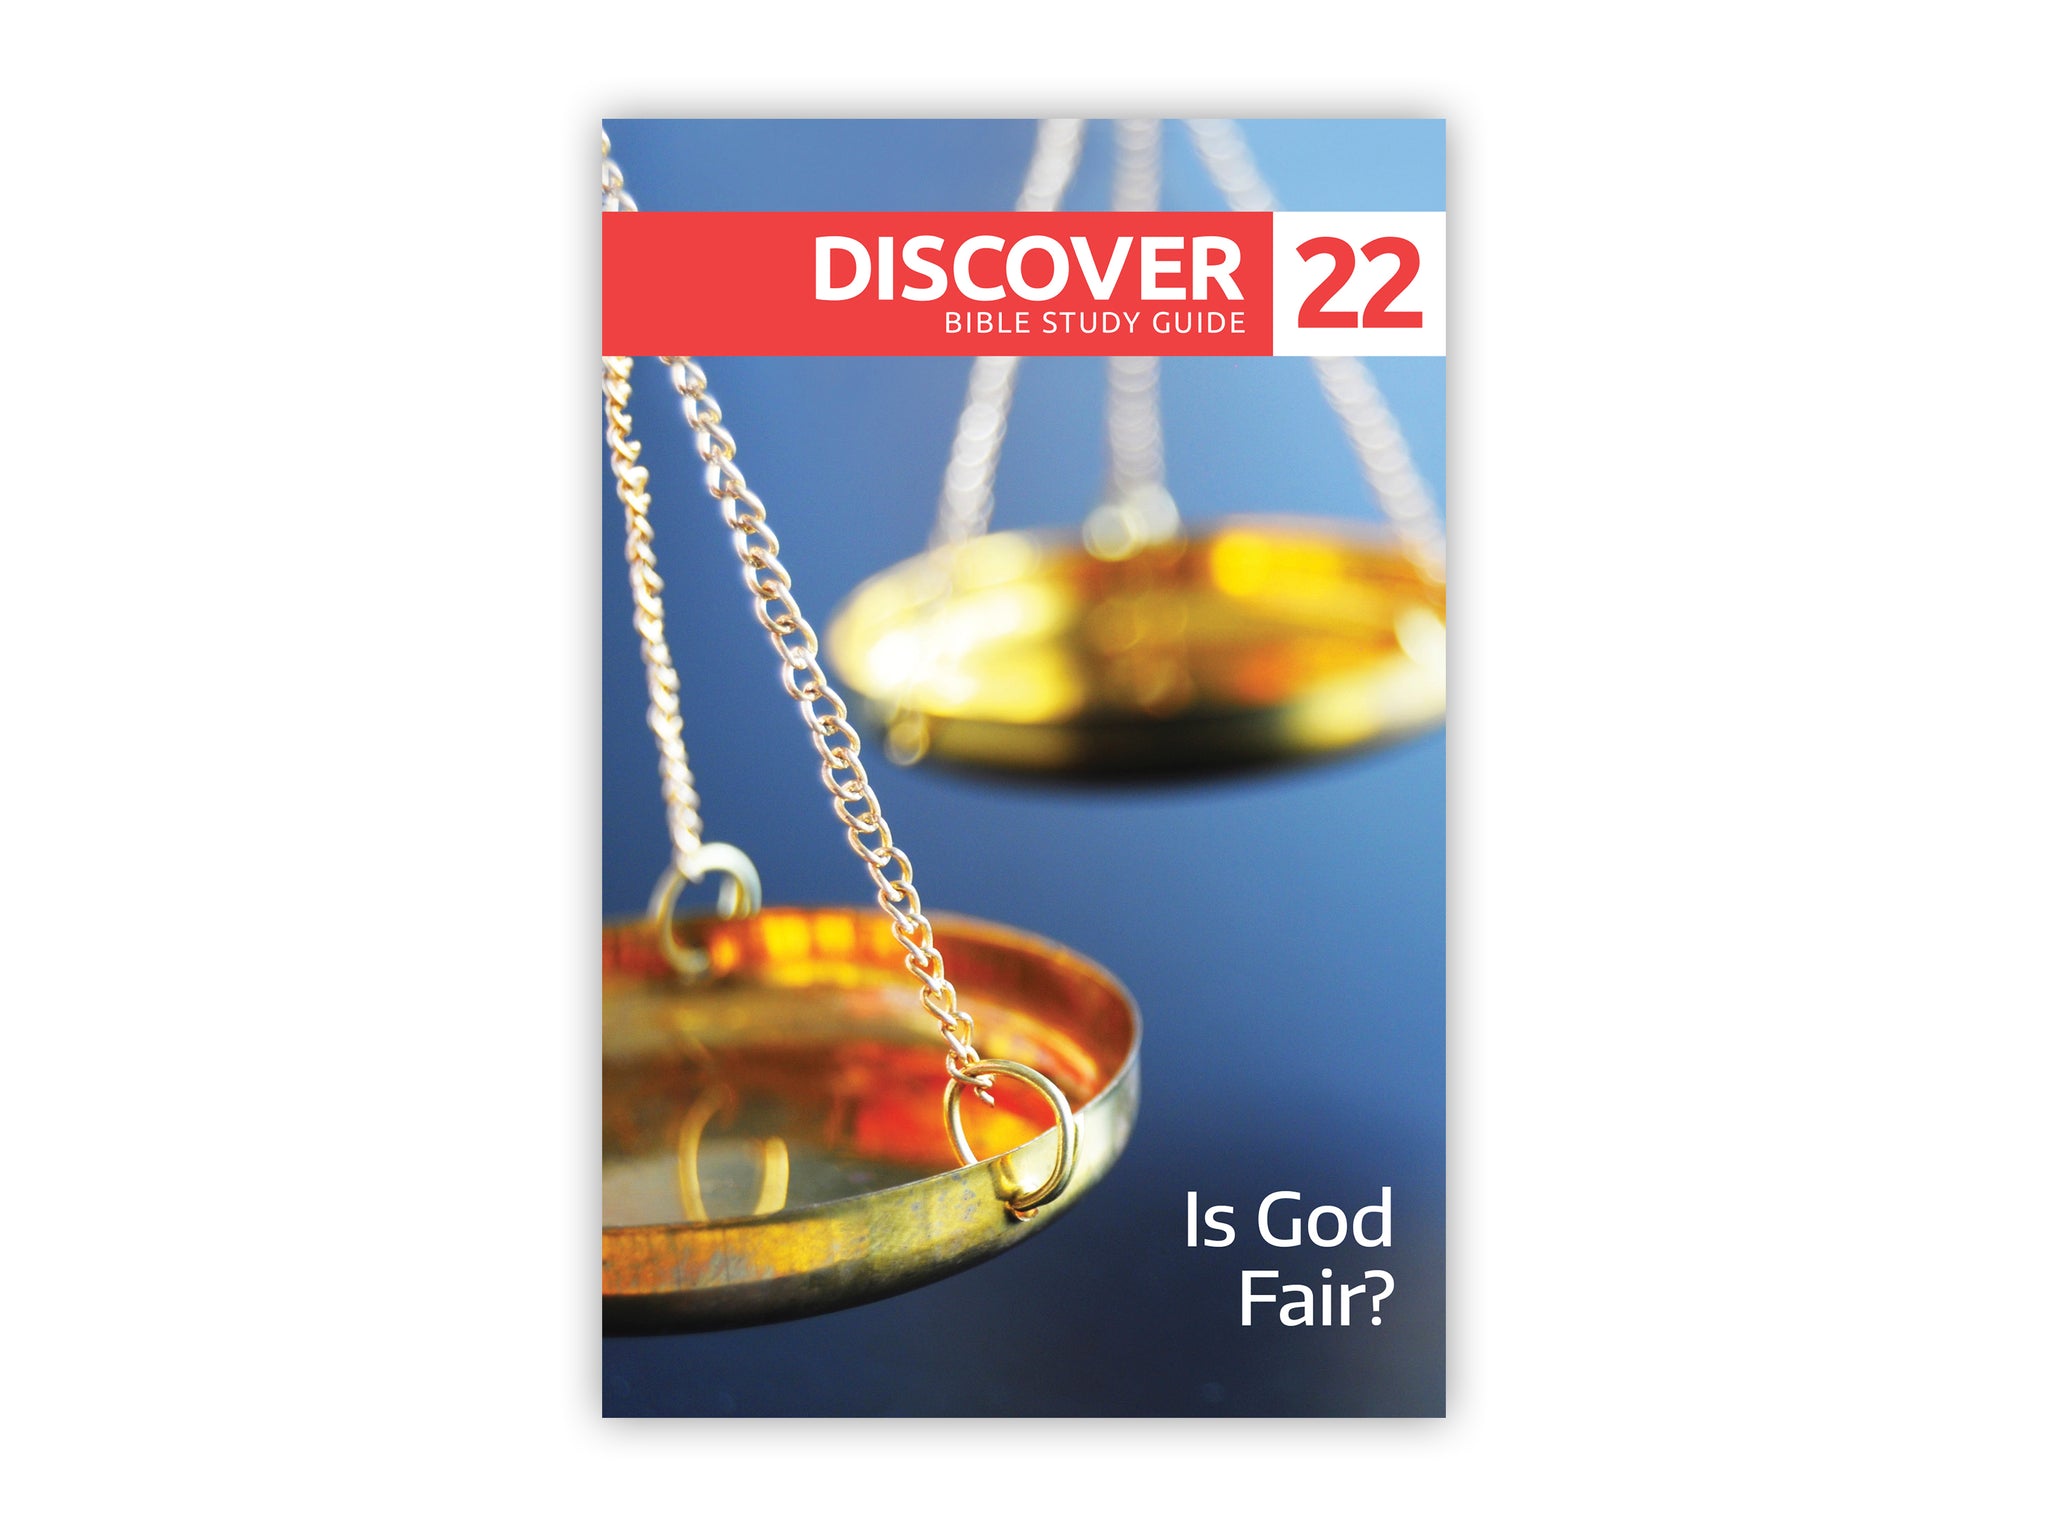 Discover Bible Study Guide #22 - Is God Fair?